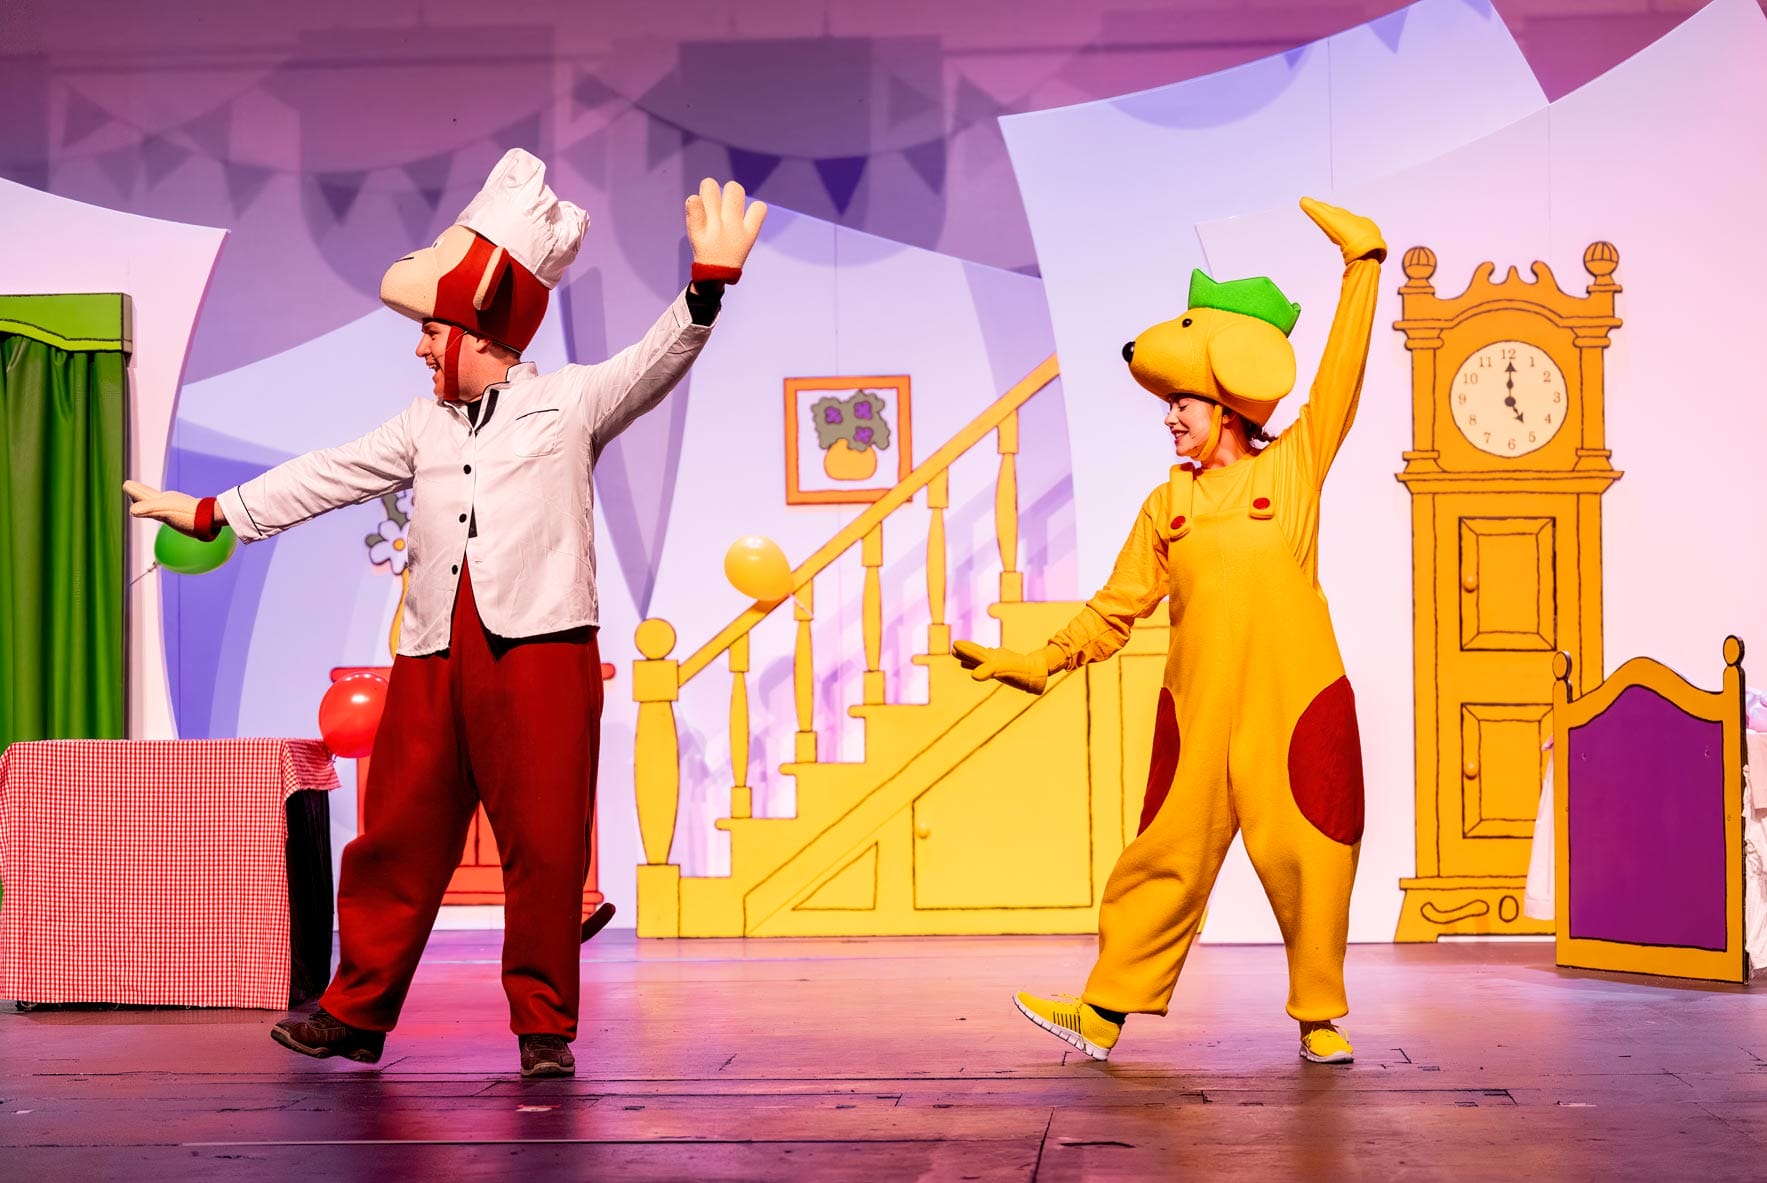 Spot and a man in a red hat are dancing on the stage.